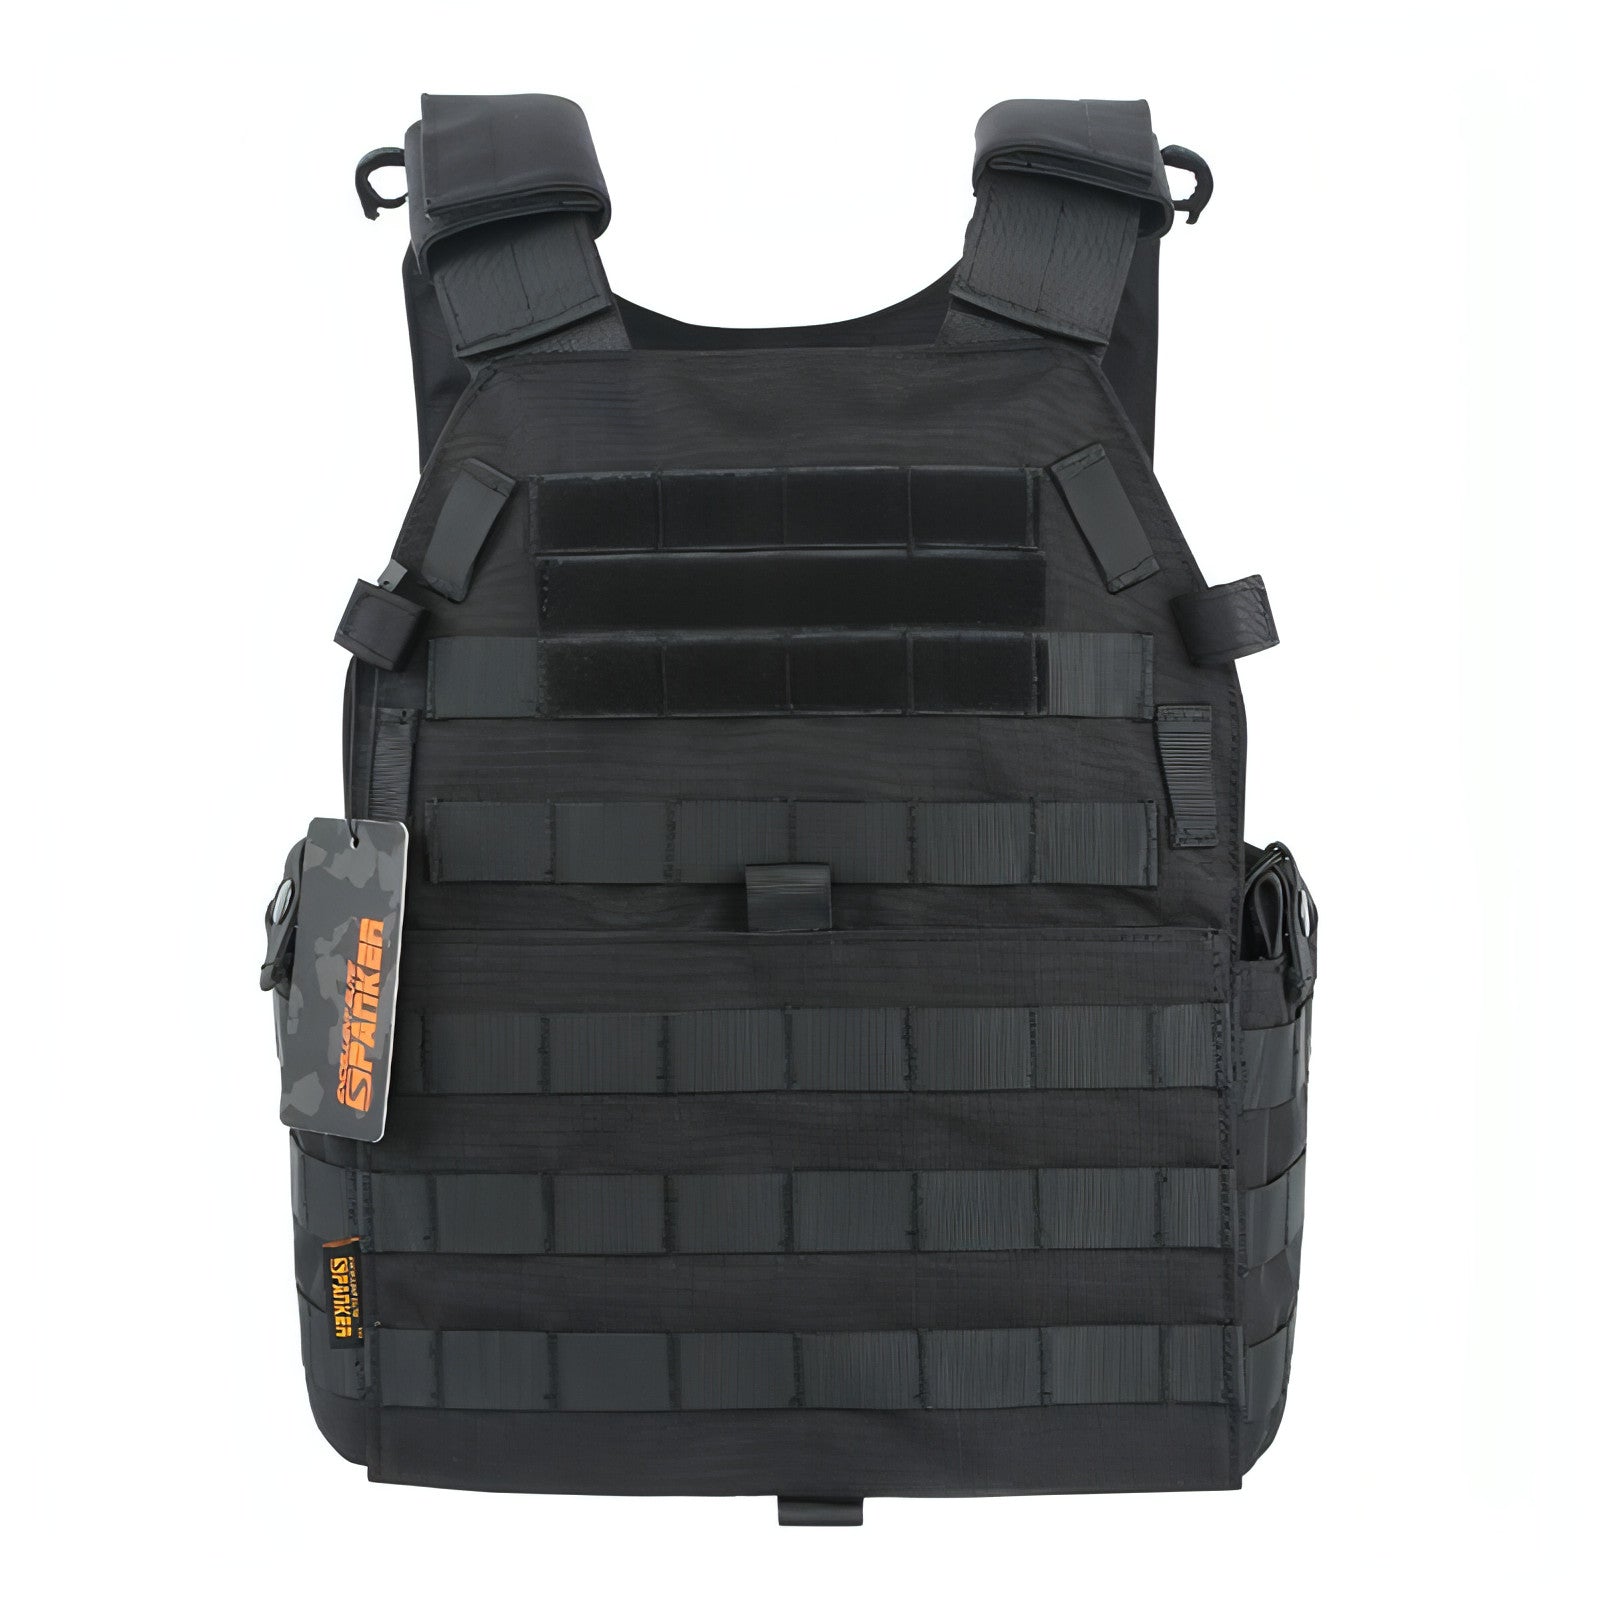 Hunting Tactical Vest Military Molle Plate Carrier Vest Airsoft